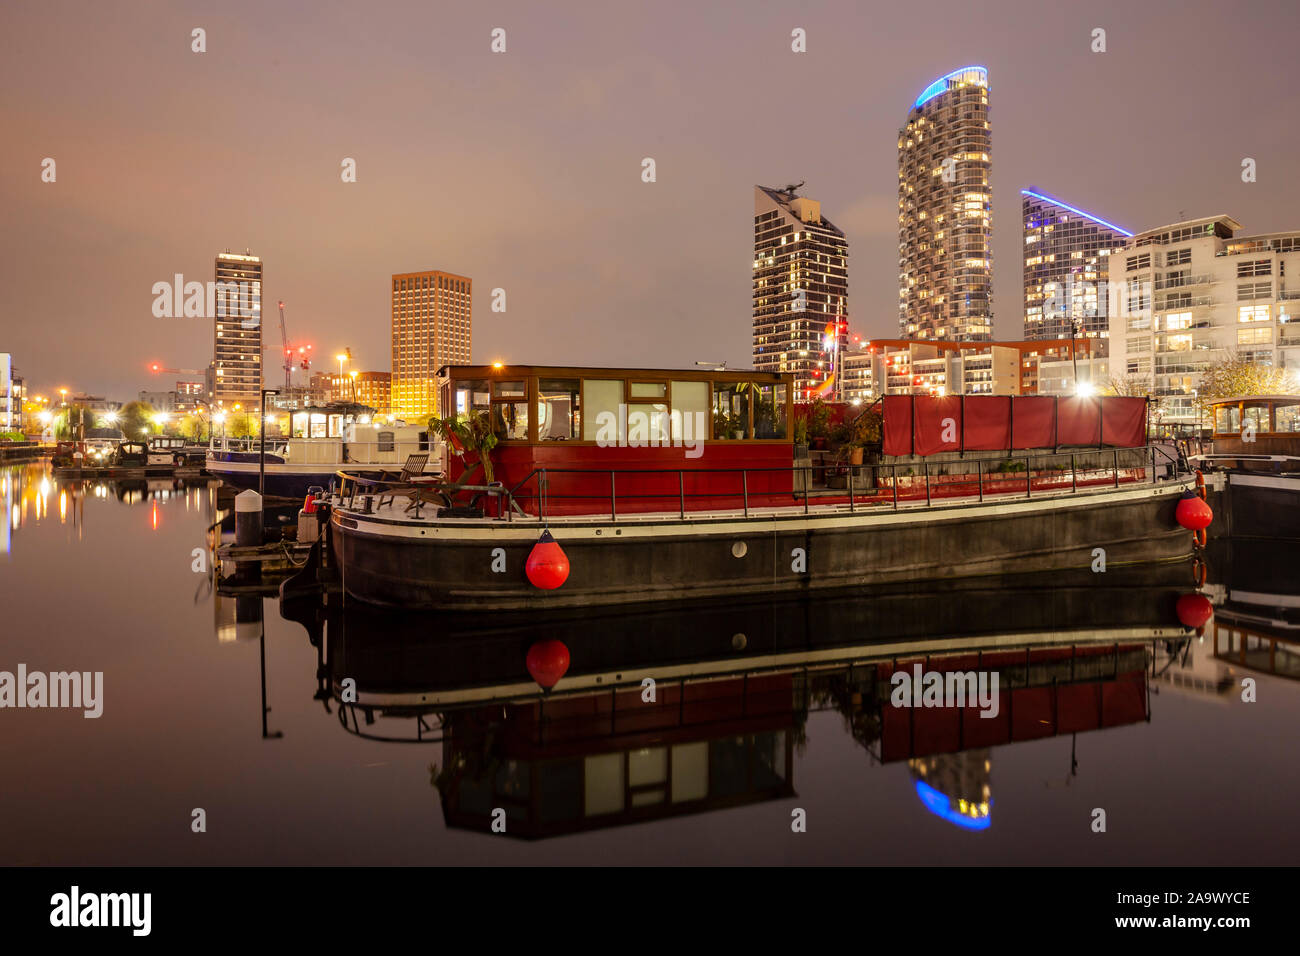 Night falls on the docklands in London, England. Stock Photo